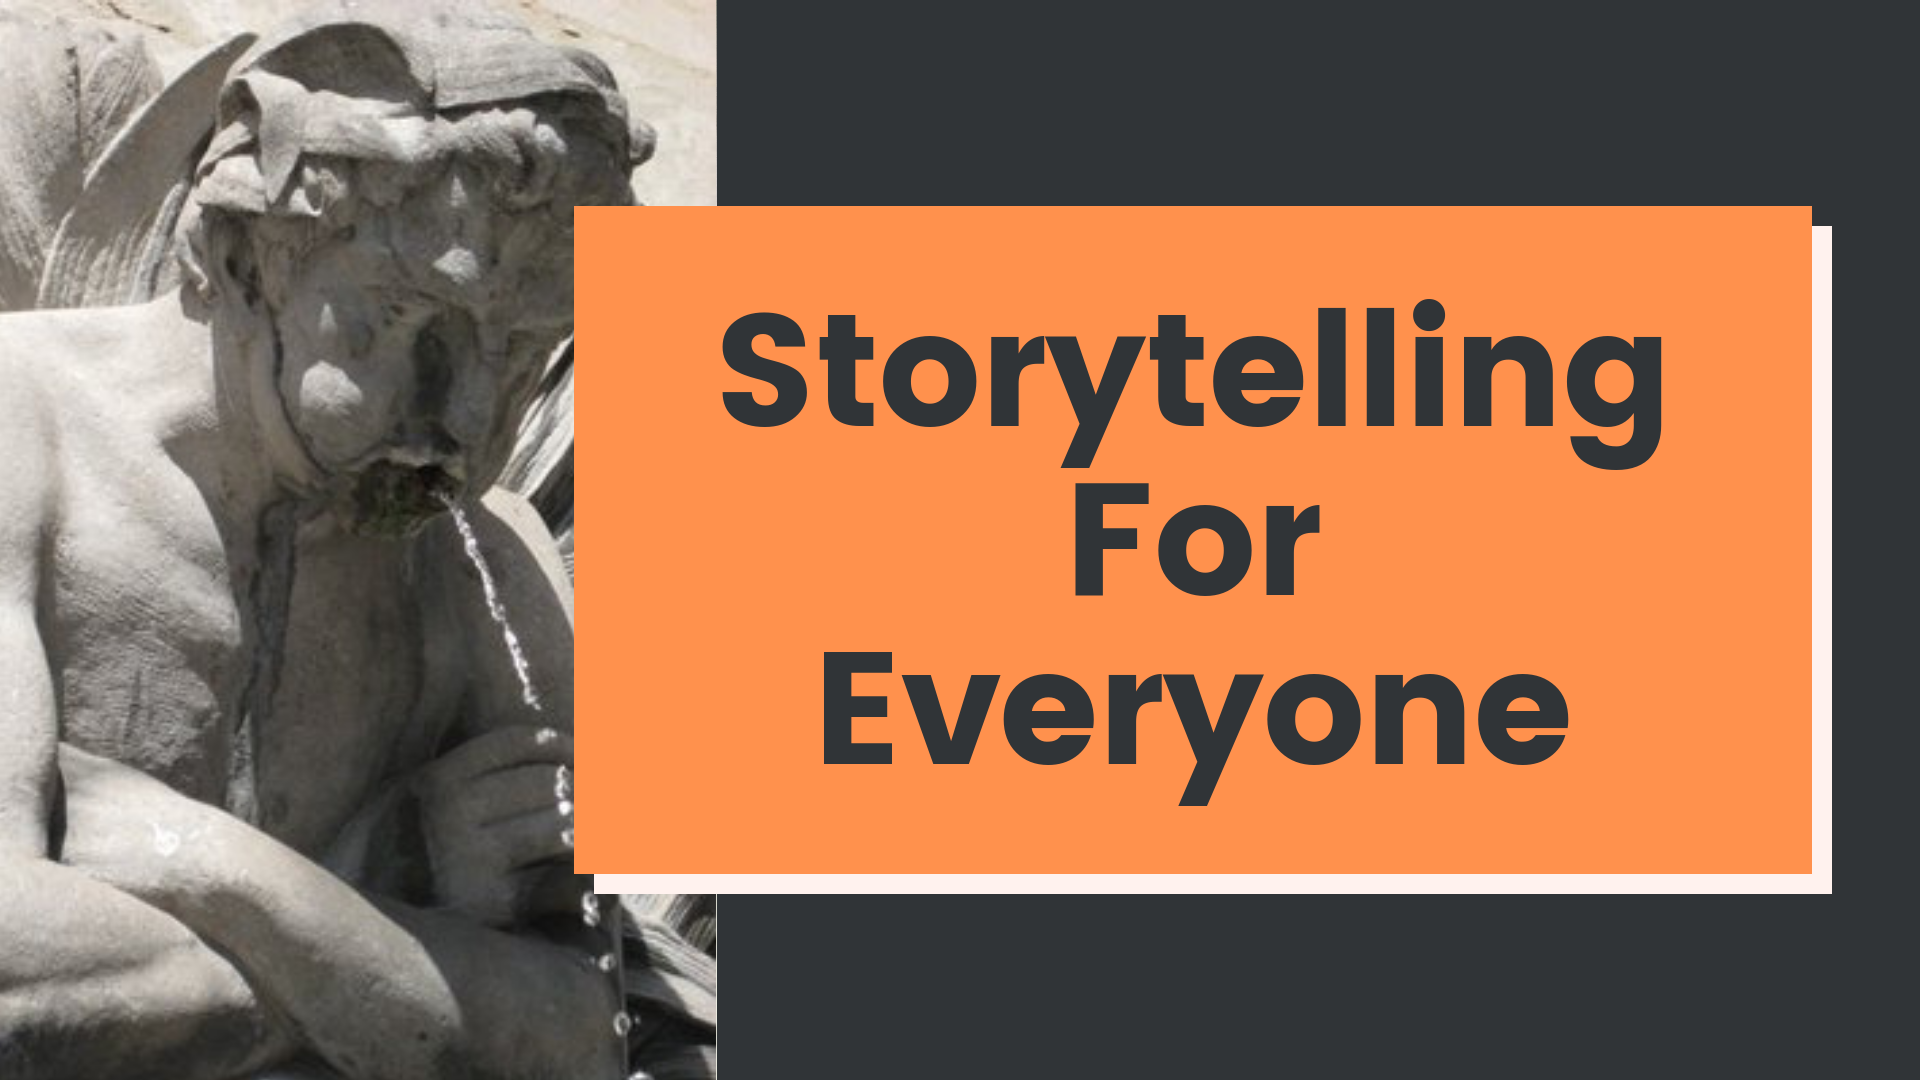 Storytelling For Everyone: A Four Week Course in Personal Narrative (ONLINE CLASS MARCH-APRIL)